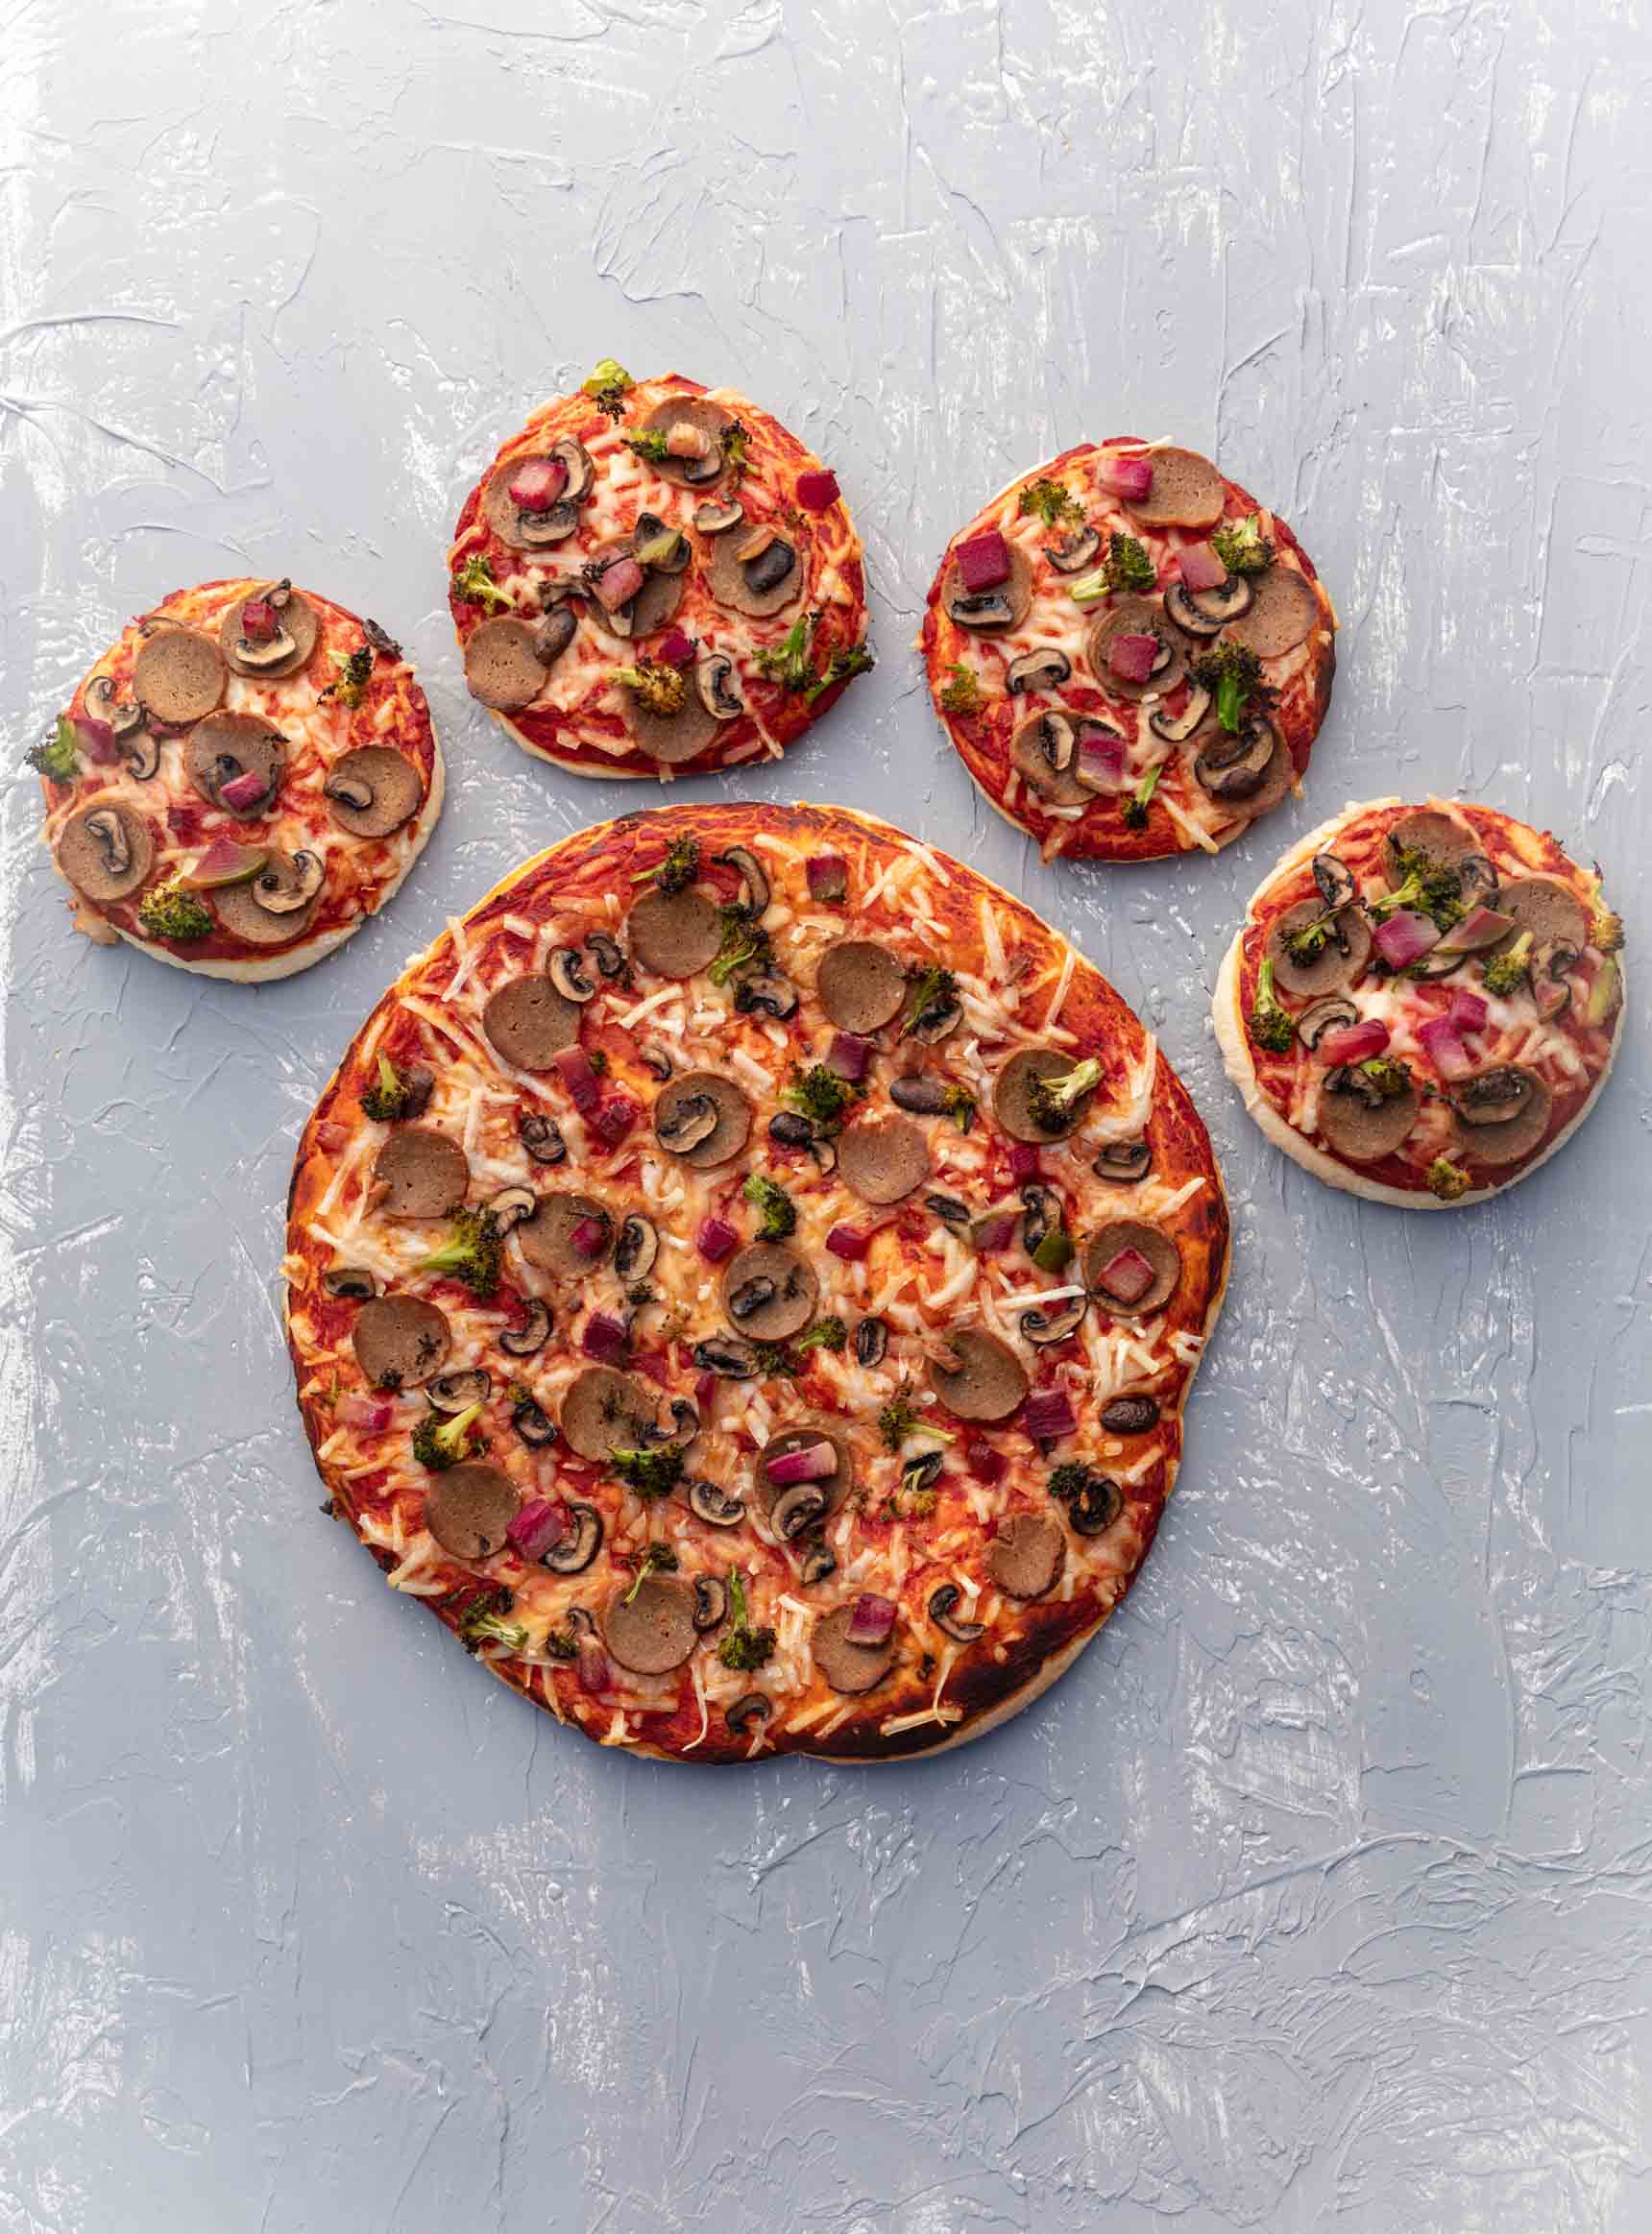 4 vegan pizzas arranged in the shape of a large paw print